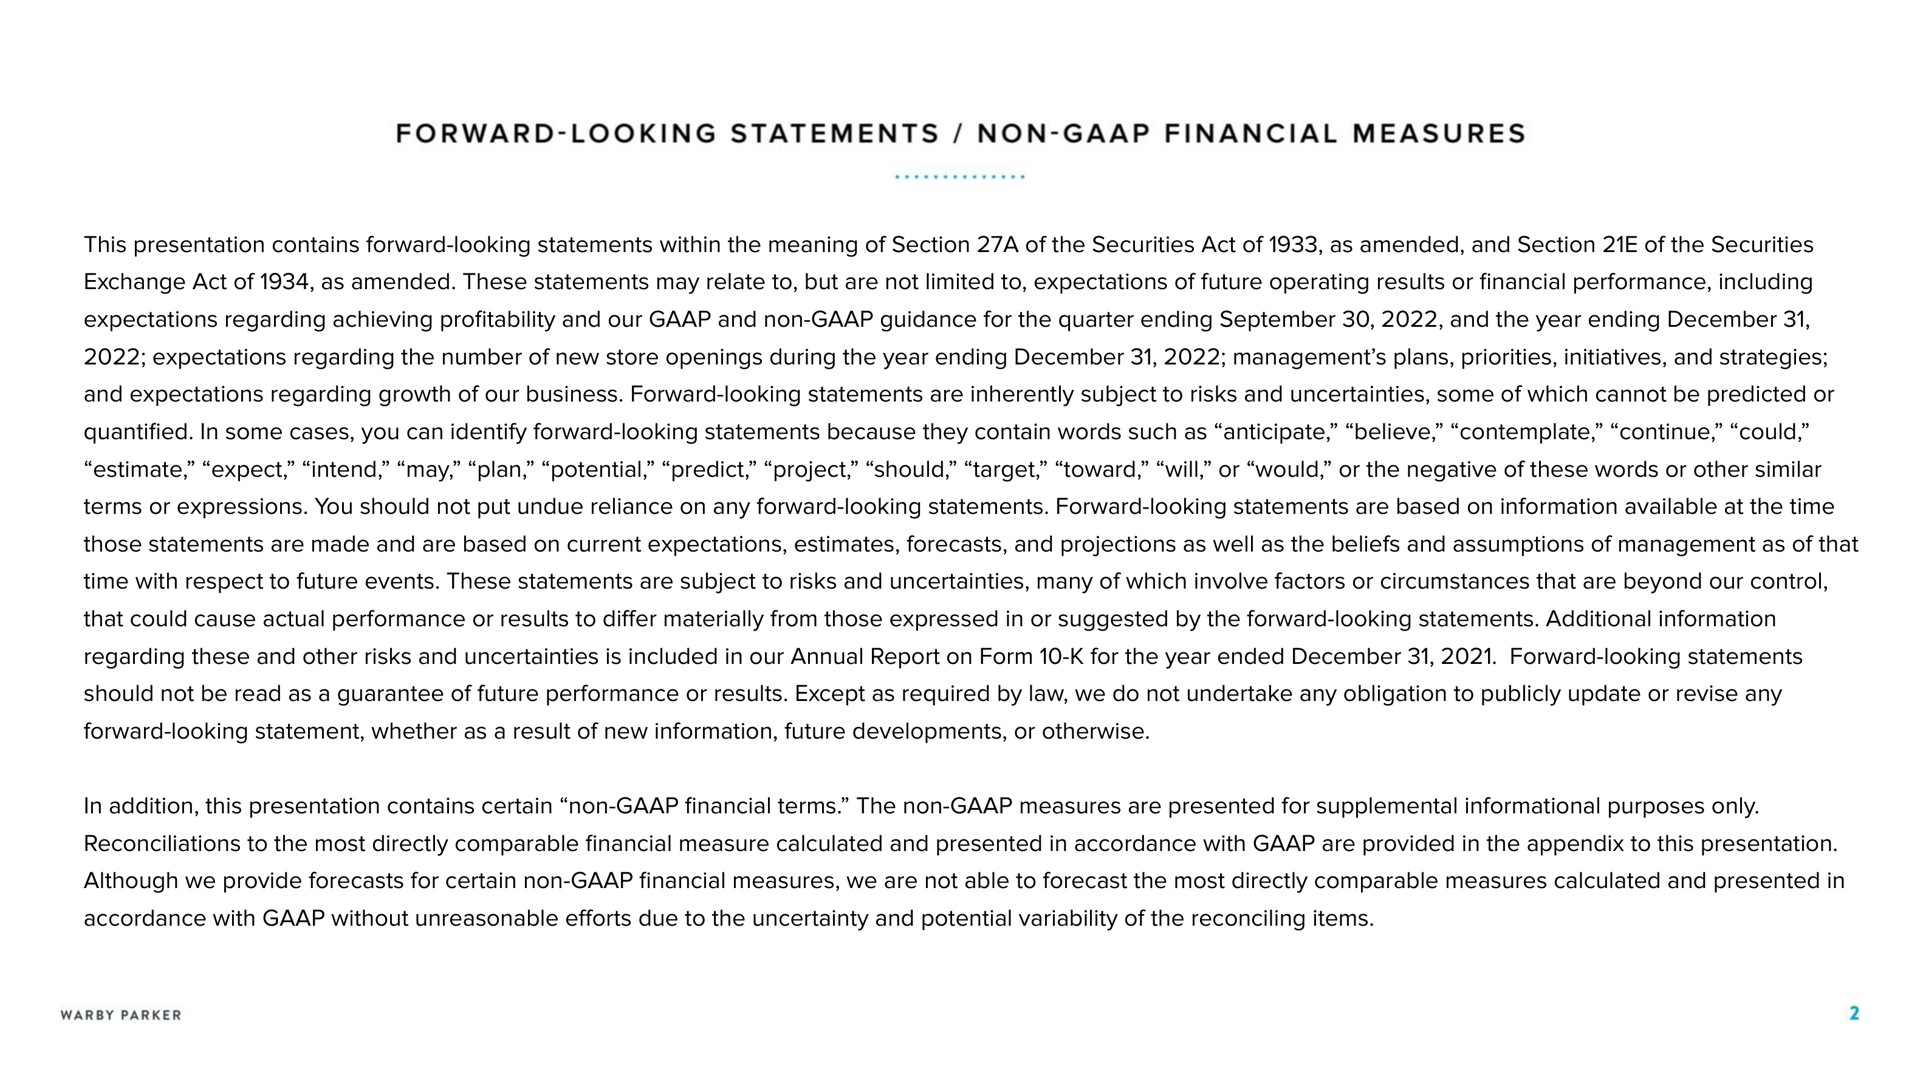 forward looking statements non financial measures this presentation contains forward looking statements within the meaning of section a of the securities act of as amended and section of the securities exchange act of as amended these statements may relate to but are not limited to expectations of future operating results or financial performance including expectations regarding achieving profitability and our and non guidance for the quarter ending and the year ending expectations regarding the number of new store openings during the year ending management plans priorities initiatives and strategies and expectations regarding growth of our business forward looking statements are inherently subject to risks and uncertainties some of which cannot be predicted or quantified in some cases you can identify forward looking statements because they contain words such as anticipate believe contemplate continue could estimate expect intend may plan potential predict project should target toward will or would or the negative of these words or other similar terms or expressions you should not put undue reliance on any forward looking statements forward looking statements are based on information available at the time those statements are made and are based on current expectations estimates forecasts and projections as well as the beliefs and assumptions of management as of that time with respect to future events these statements are subject to risks and uncertainties many of which involve factors or circumstances that are beyond our control that could cause actual performance or results to differ materially from those expressed in or suggested by the forward looking statements additional information regarding these and other risks and uncertainties is included in our annual report on form for the year ended forward looking statements should not be read as a guarantee of future performance or results except as required by law we do not undertake any obligation to publicly update or revise any forward looking statement whether as a result of new information future developments or otherwise in addition this presentation contains certain non financial terms the non measures are presented for supplemental informational purposes only reconciliations to the most directly comparable financial measure calculated and presented in accordance with are provided in the appendix to this presentation although we provide forecasts for certain non financial measures we are not able to forecast the most directly comparable measures calculated and presented in accordance with without unreasonable efforts due to the uncertainty and potential variability of the reconciling items | Warby Parker